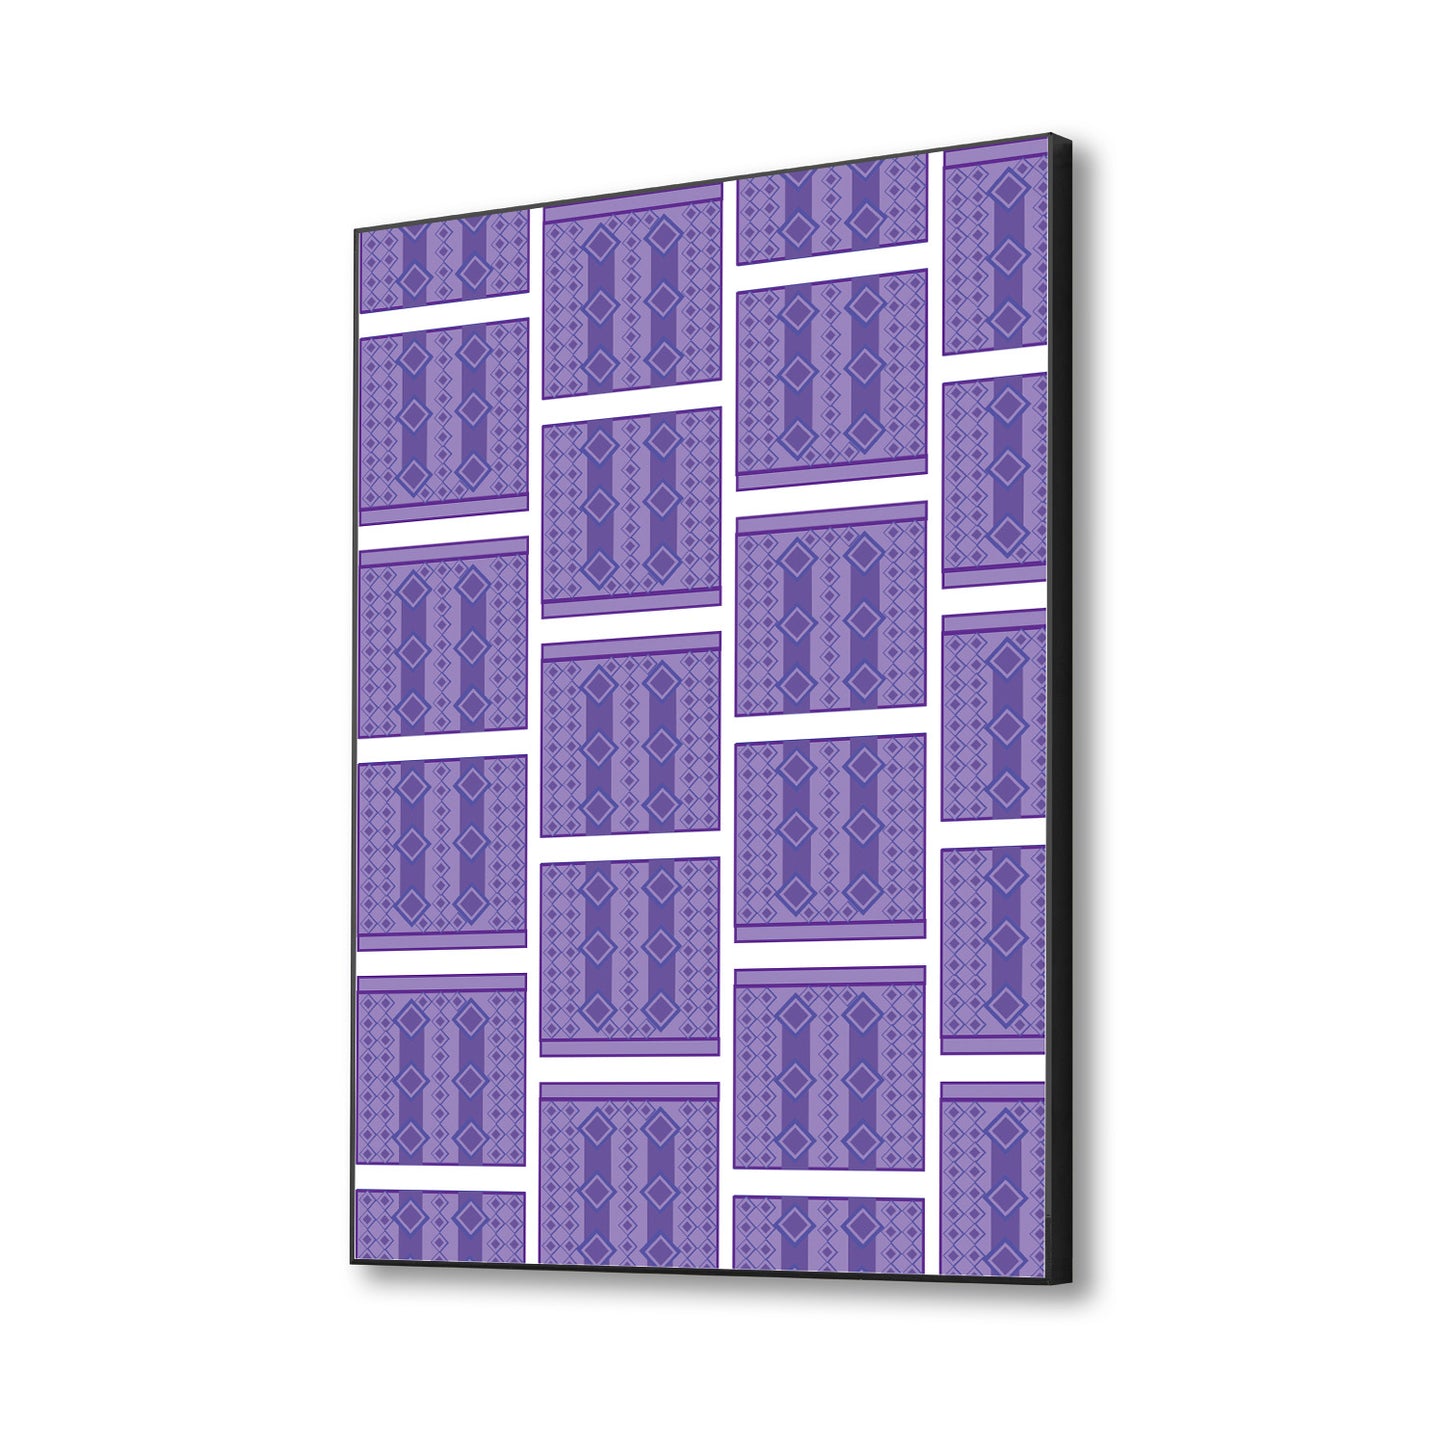 Striking Purple And White Art Canvas Wall Painting